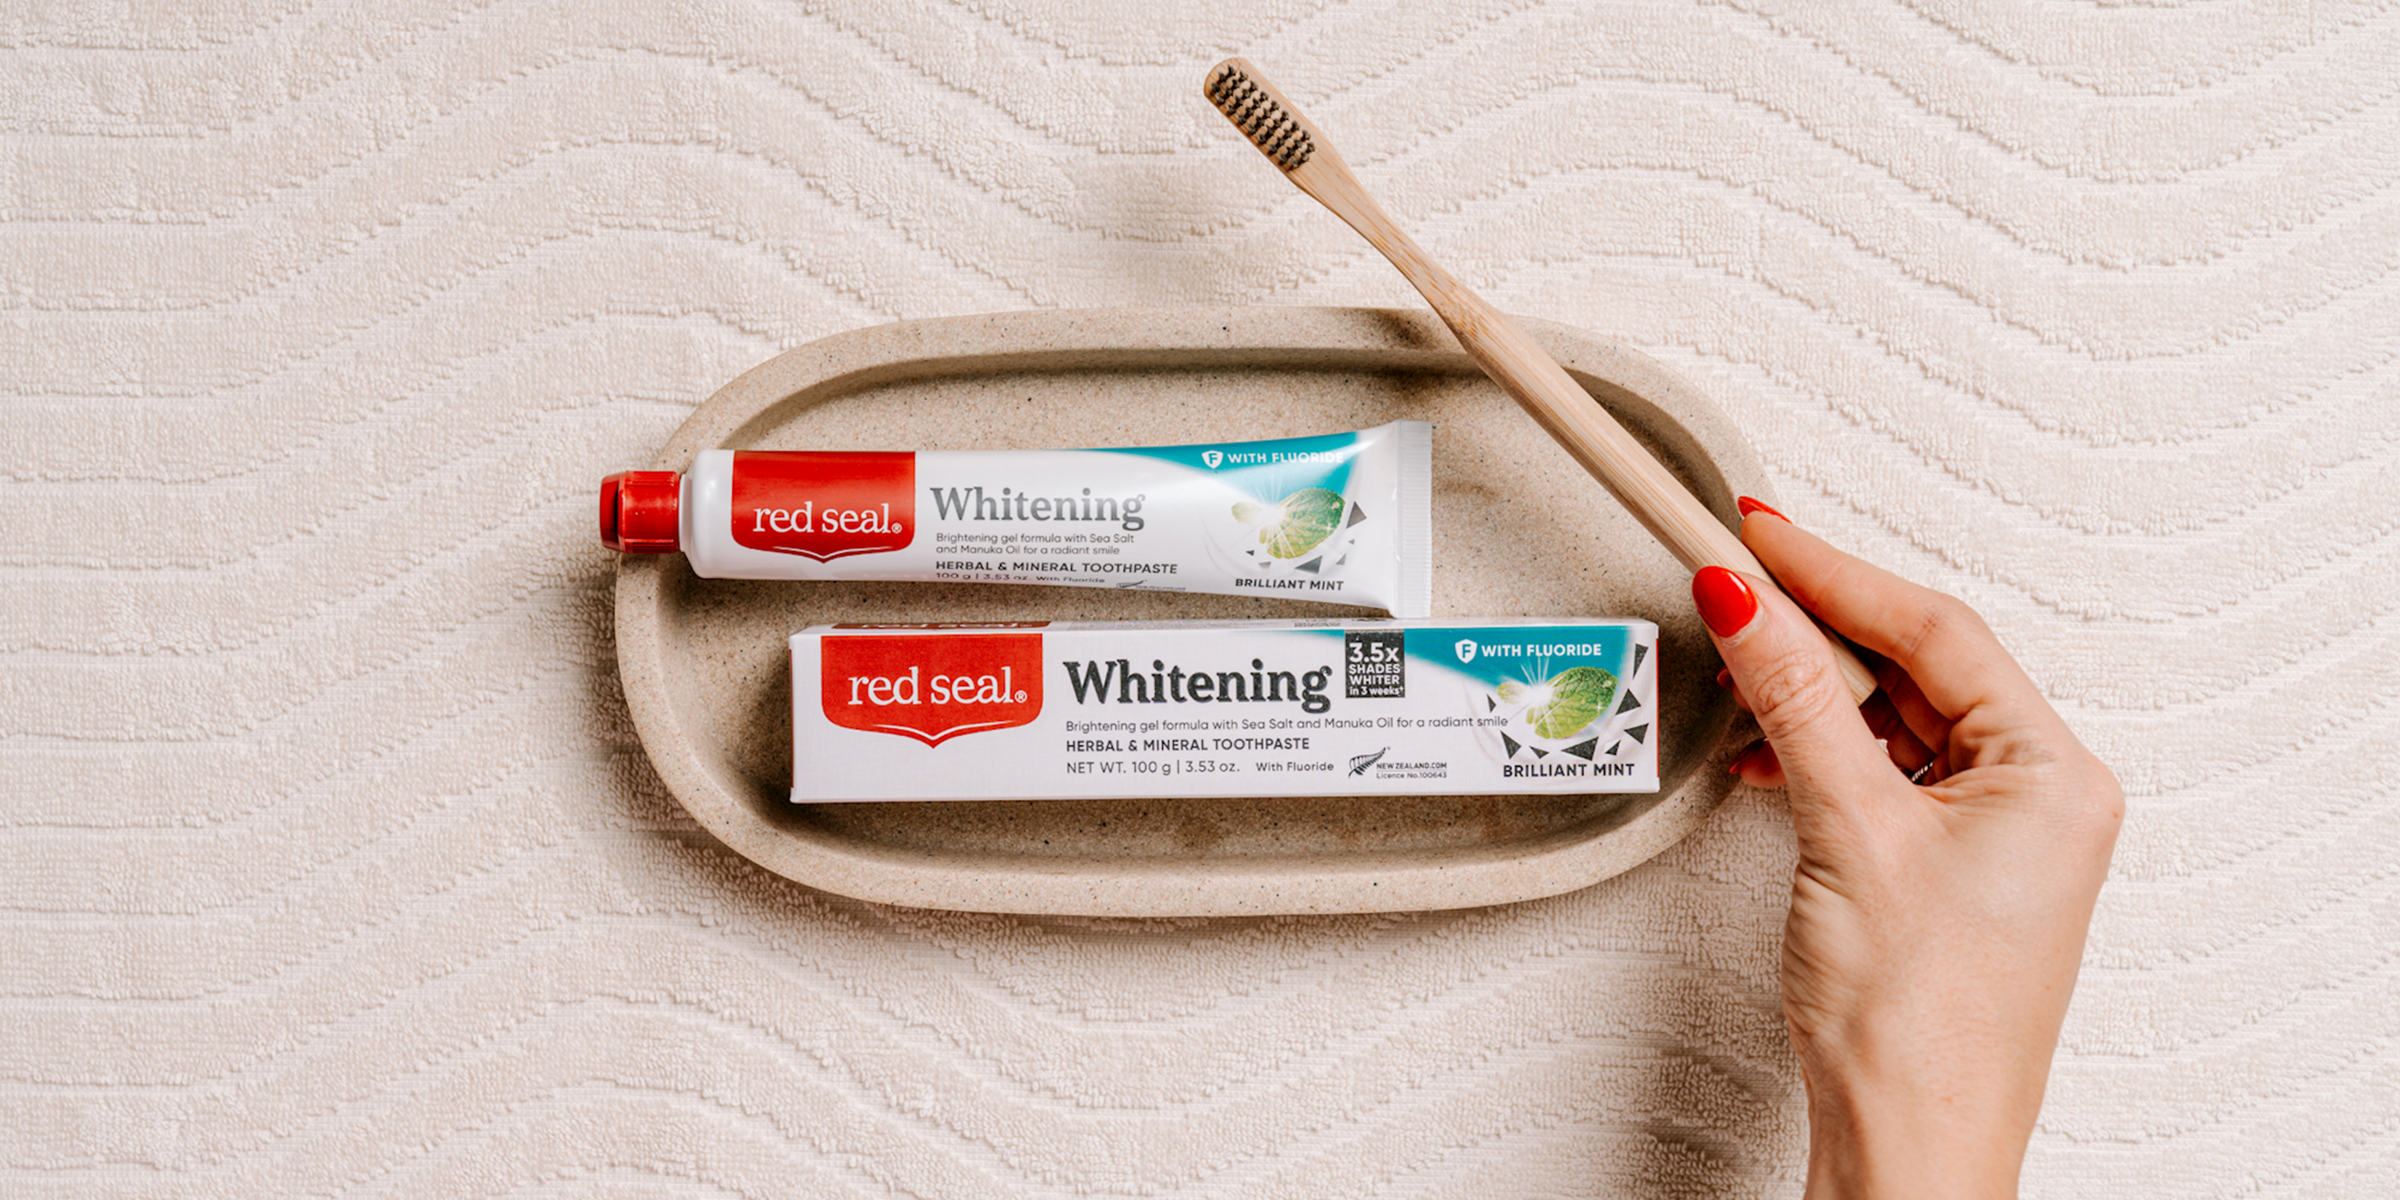 Whitening Fluoride Toothpaste from Red Seal